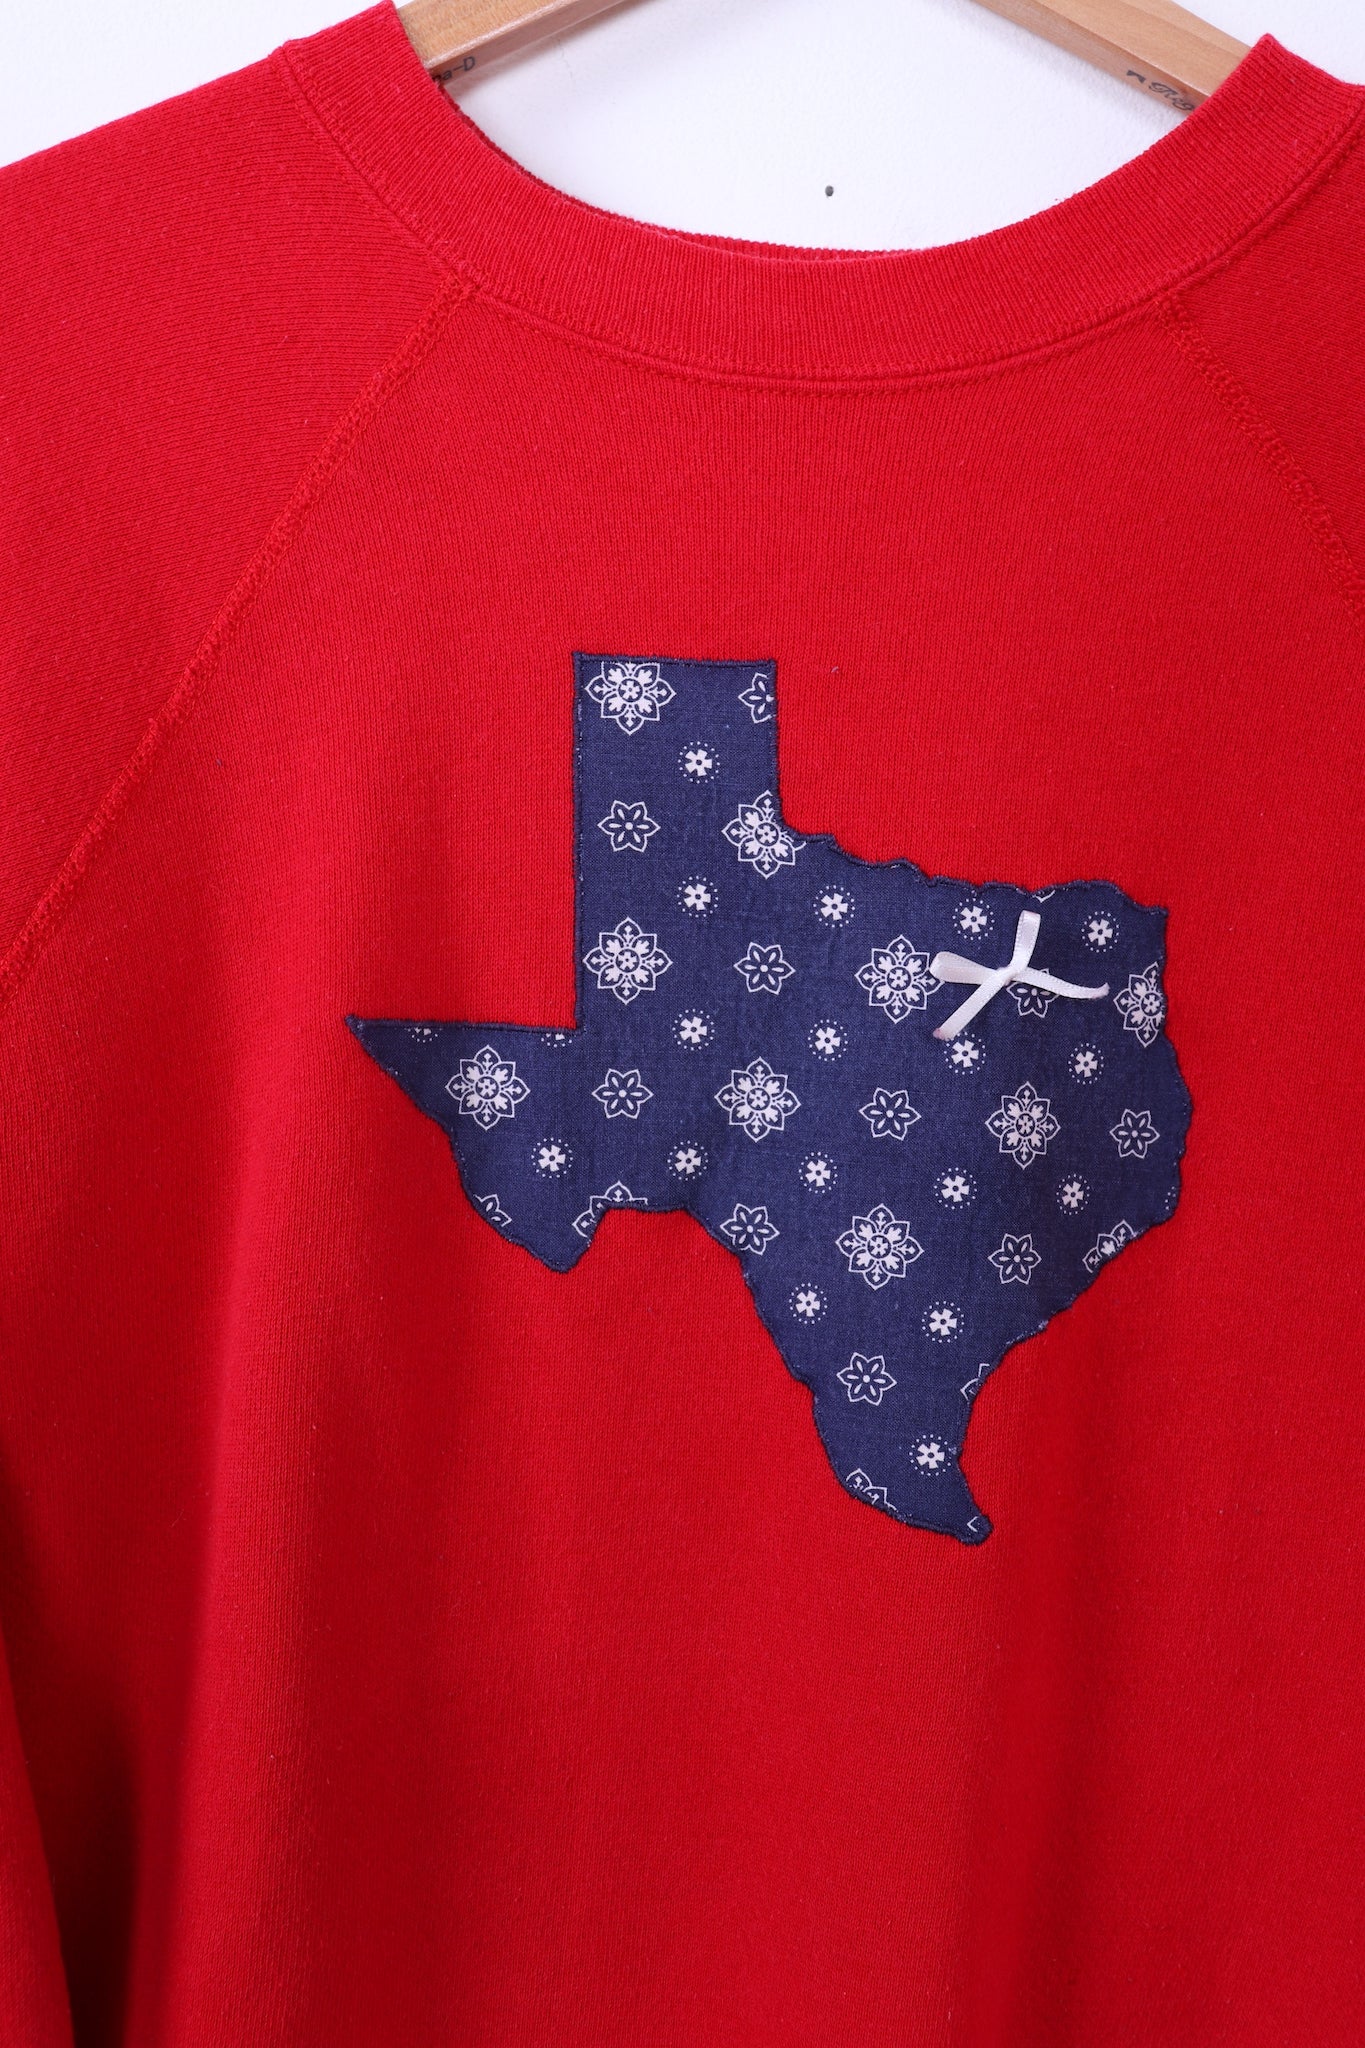 Tultex 70s-80s State of Texas Crewneck